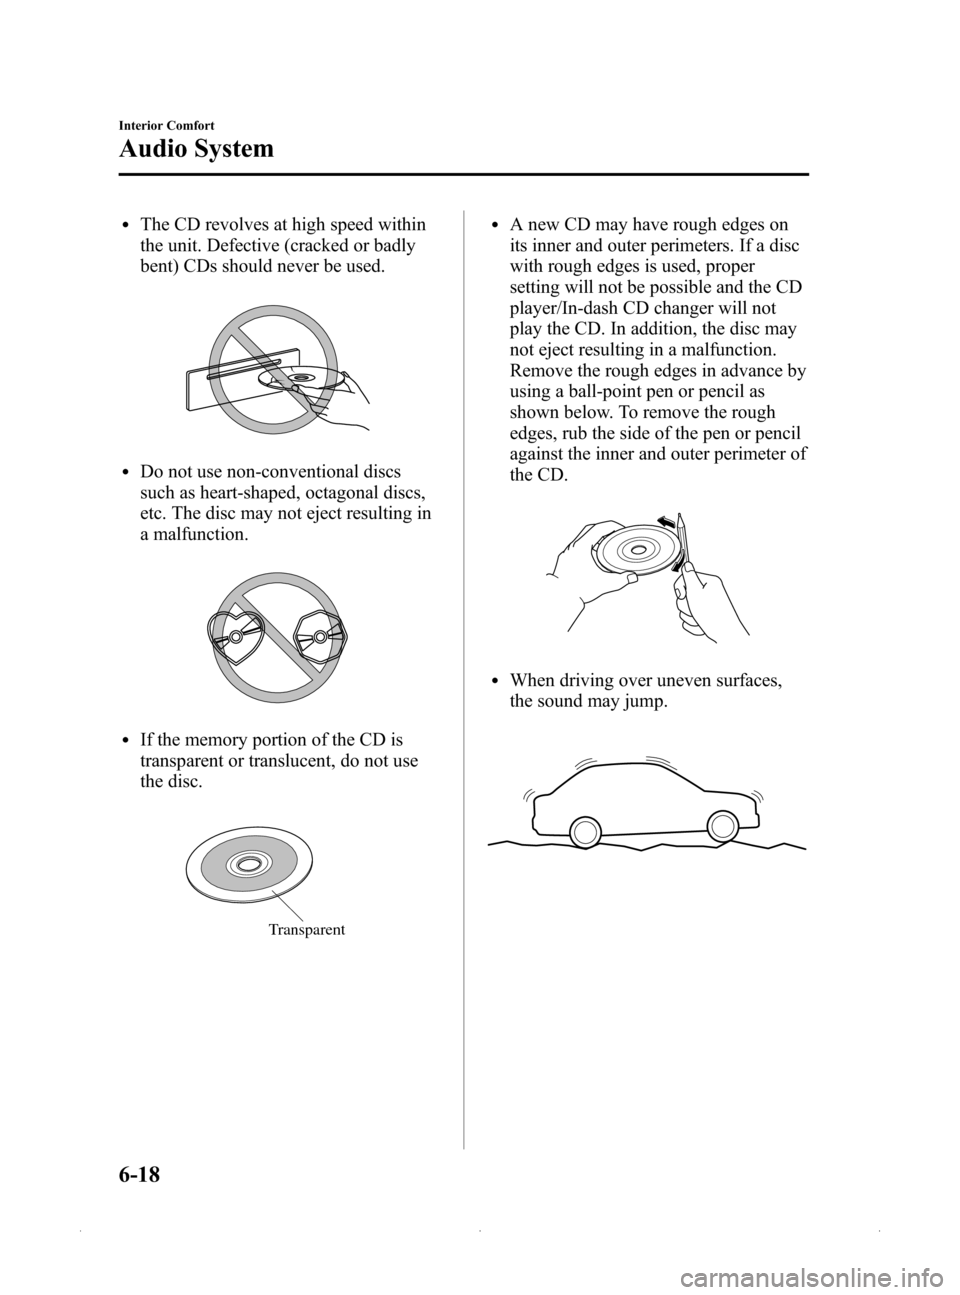 MAZDA MODEL MX-5 2015  Owners Manual (in English) Black plate (230,1)
lThe CD revolves at high speed within
the unit. Defective (cracked or badly
bent) CDs should never be used.
lDo not use non-conventional discs
such as heart-shaped, octagonal discs